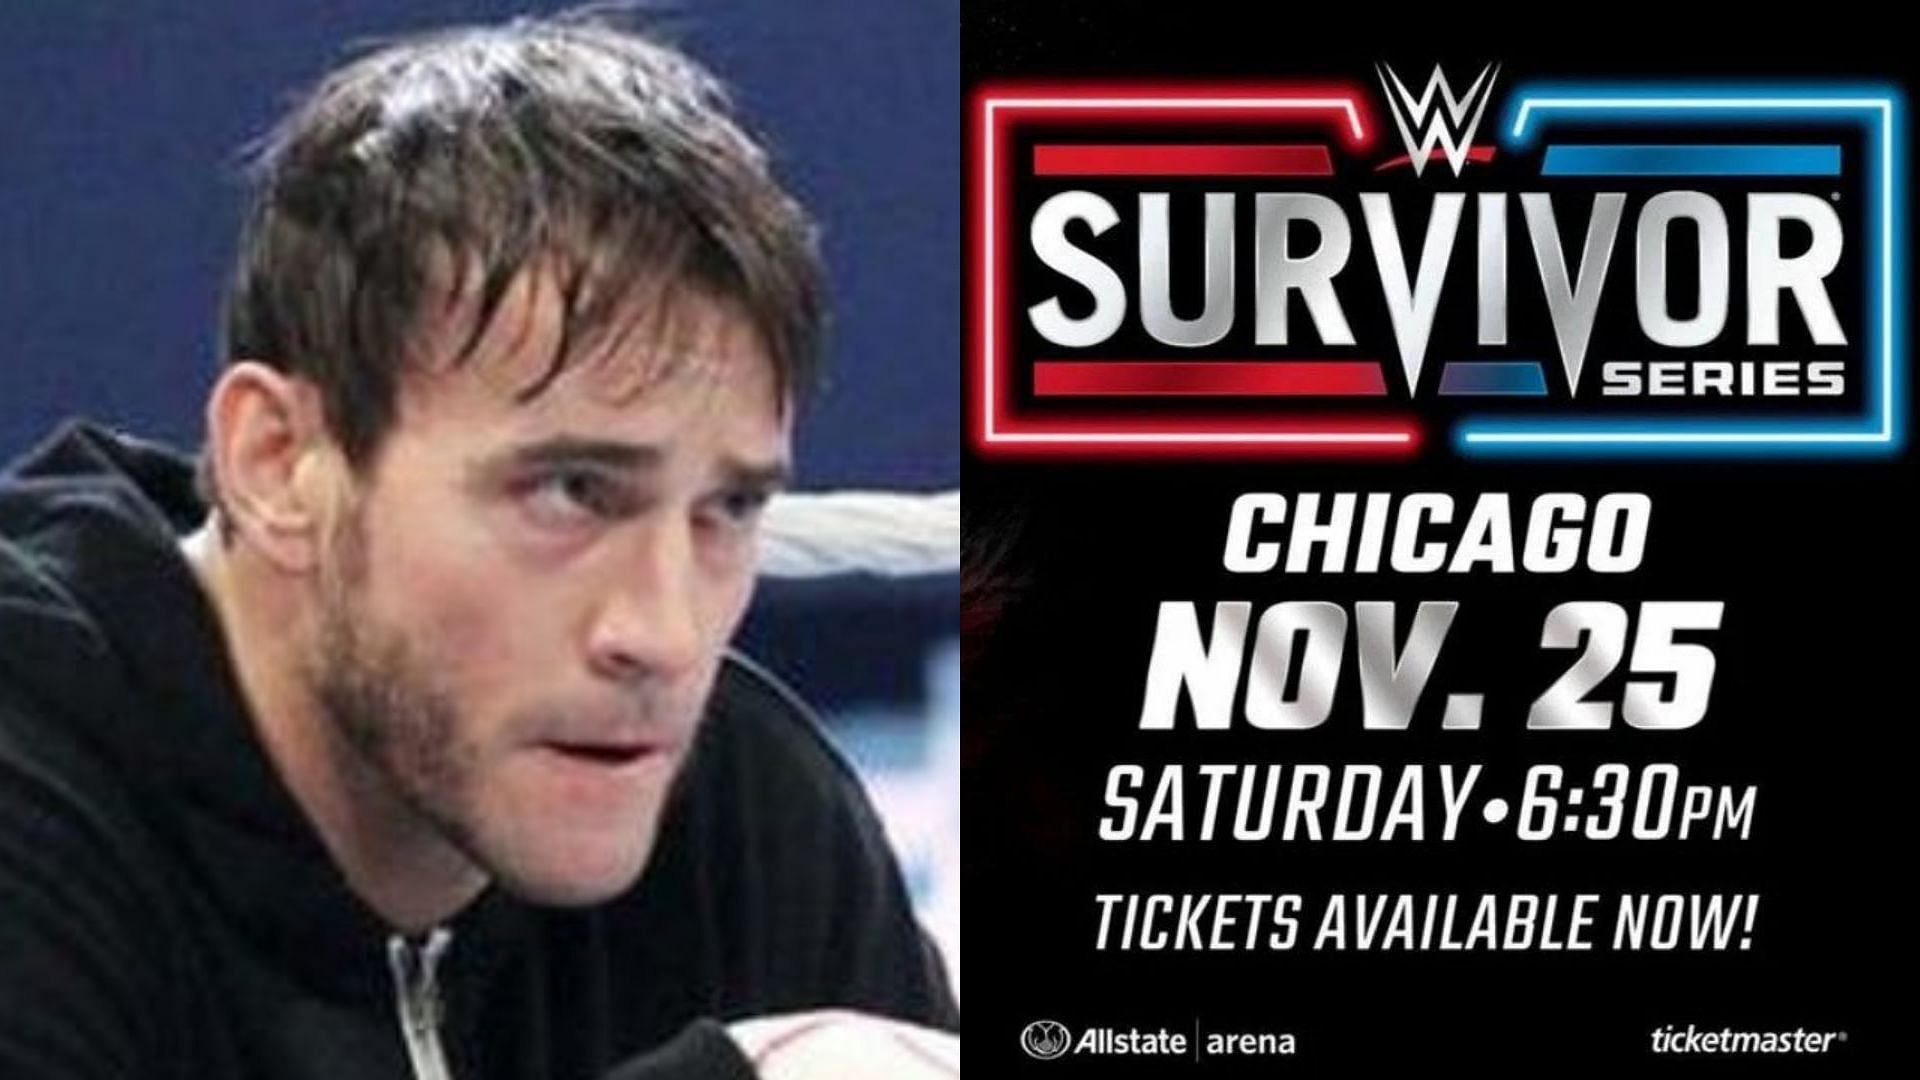 Could CM Punk return to WWE at Survivor Series?